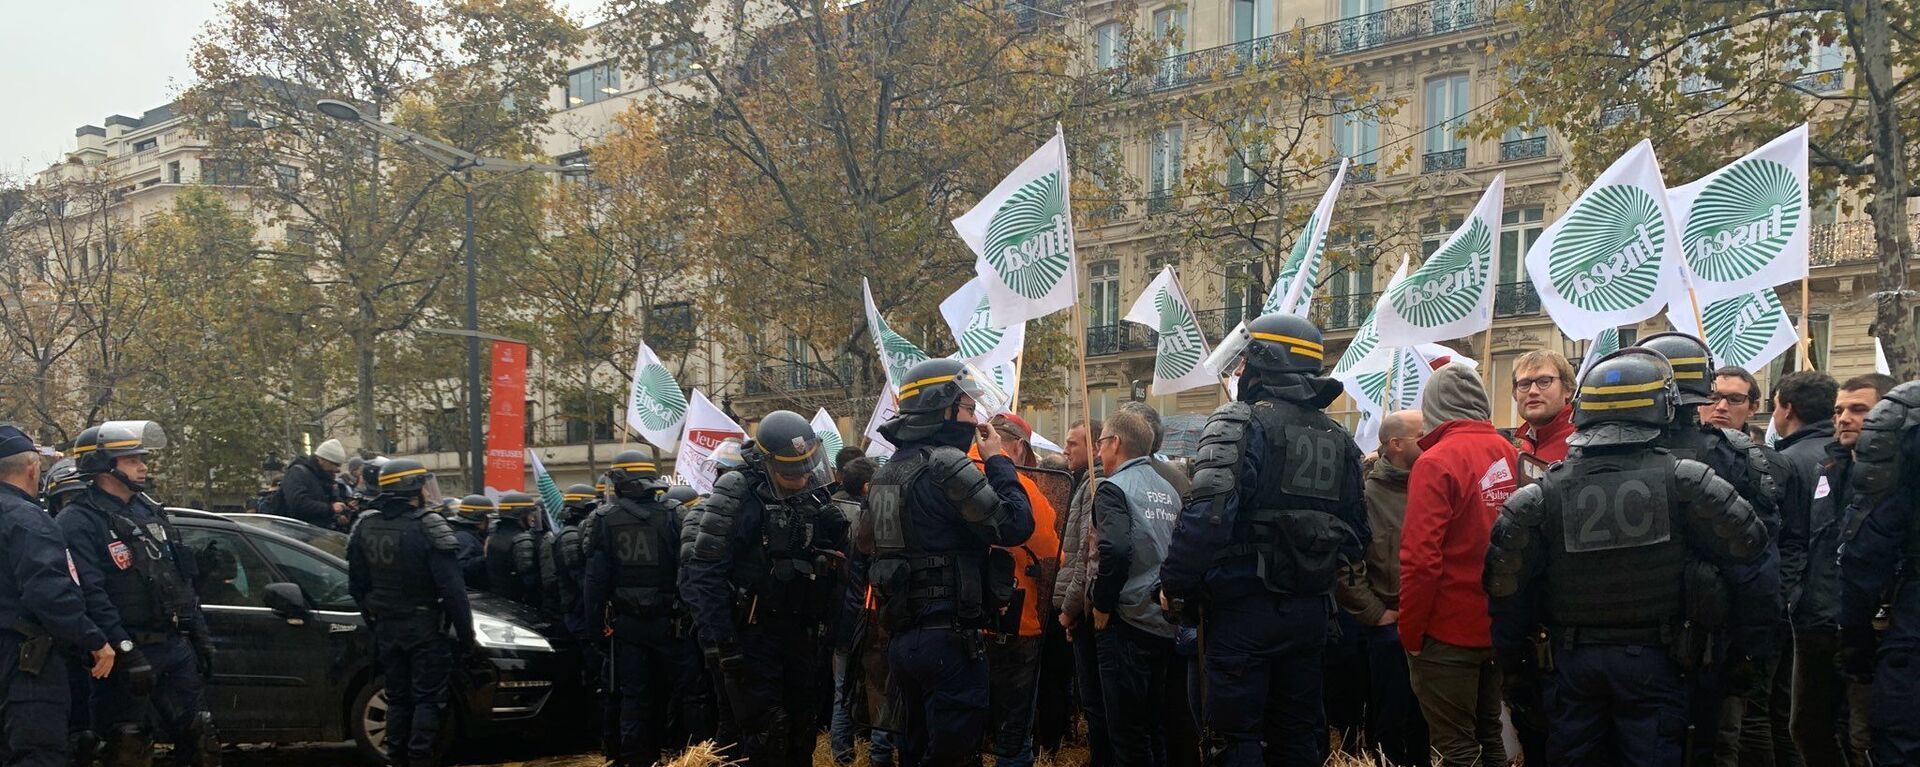 French farmers  protesting against low farm incomes and growing criticism of agricultural practices, France, November 27, 2019 - Sputnik International, 1920, 03.03.2024